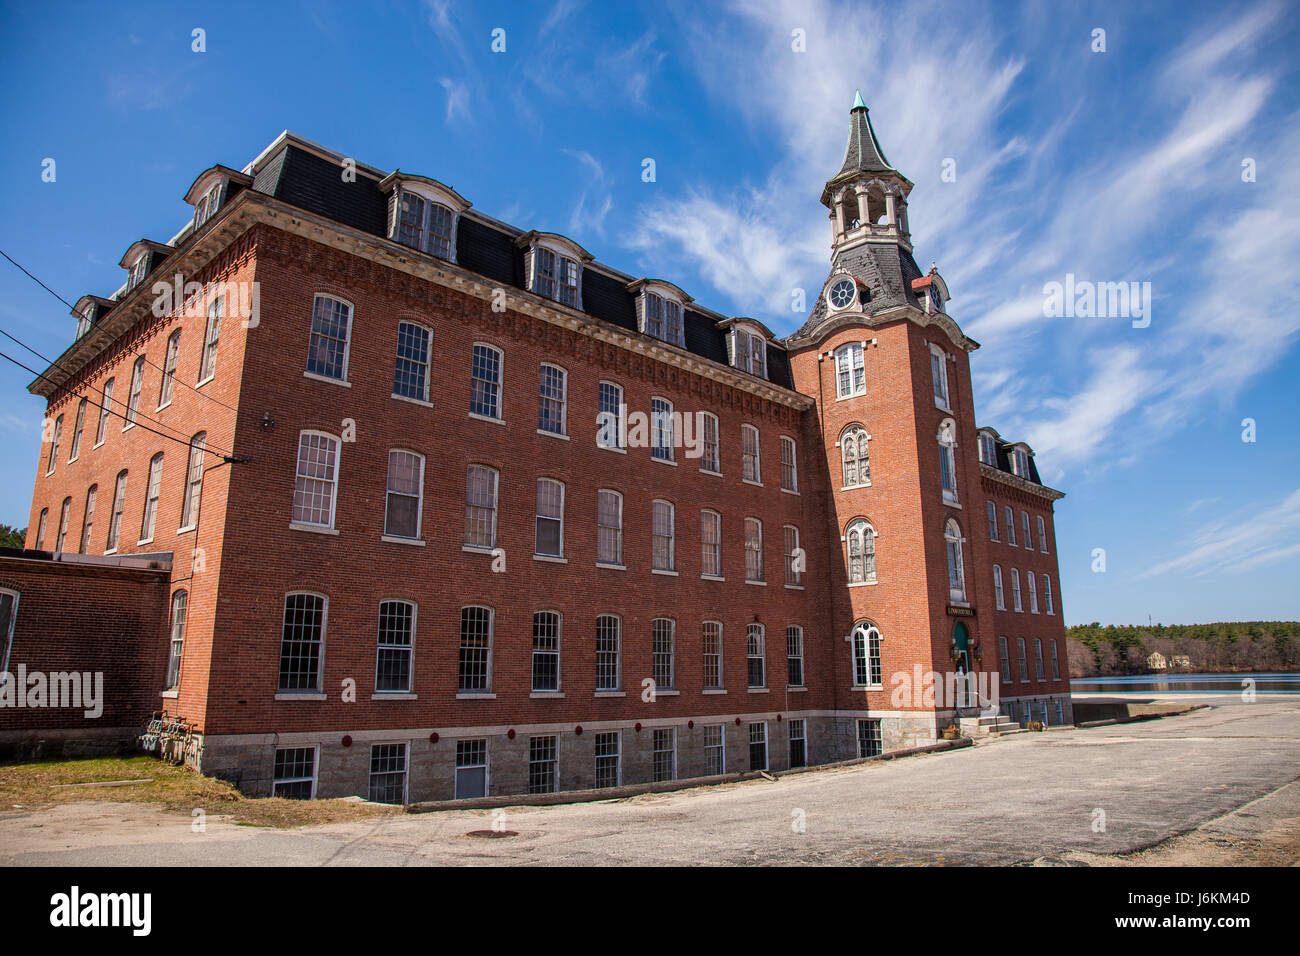 The The Linwood Cotton Mill in Northbridge, MA Stock Photo